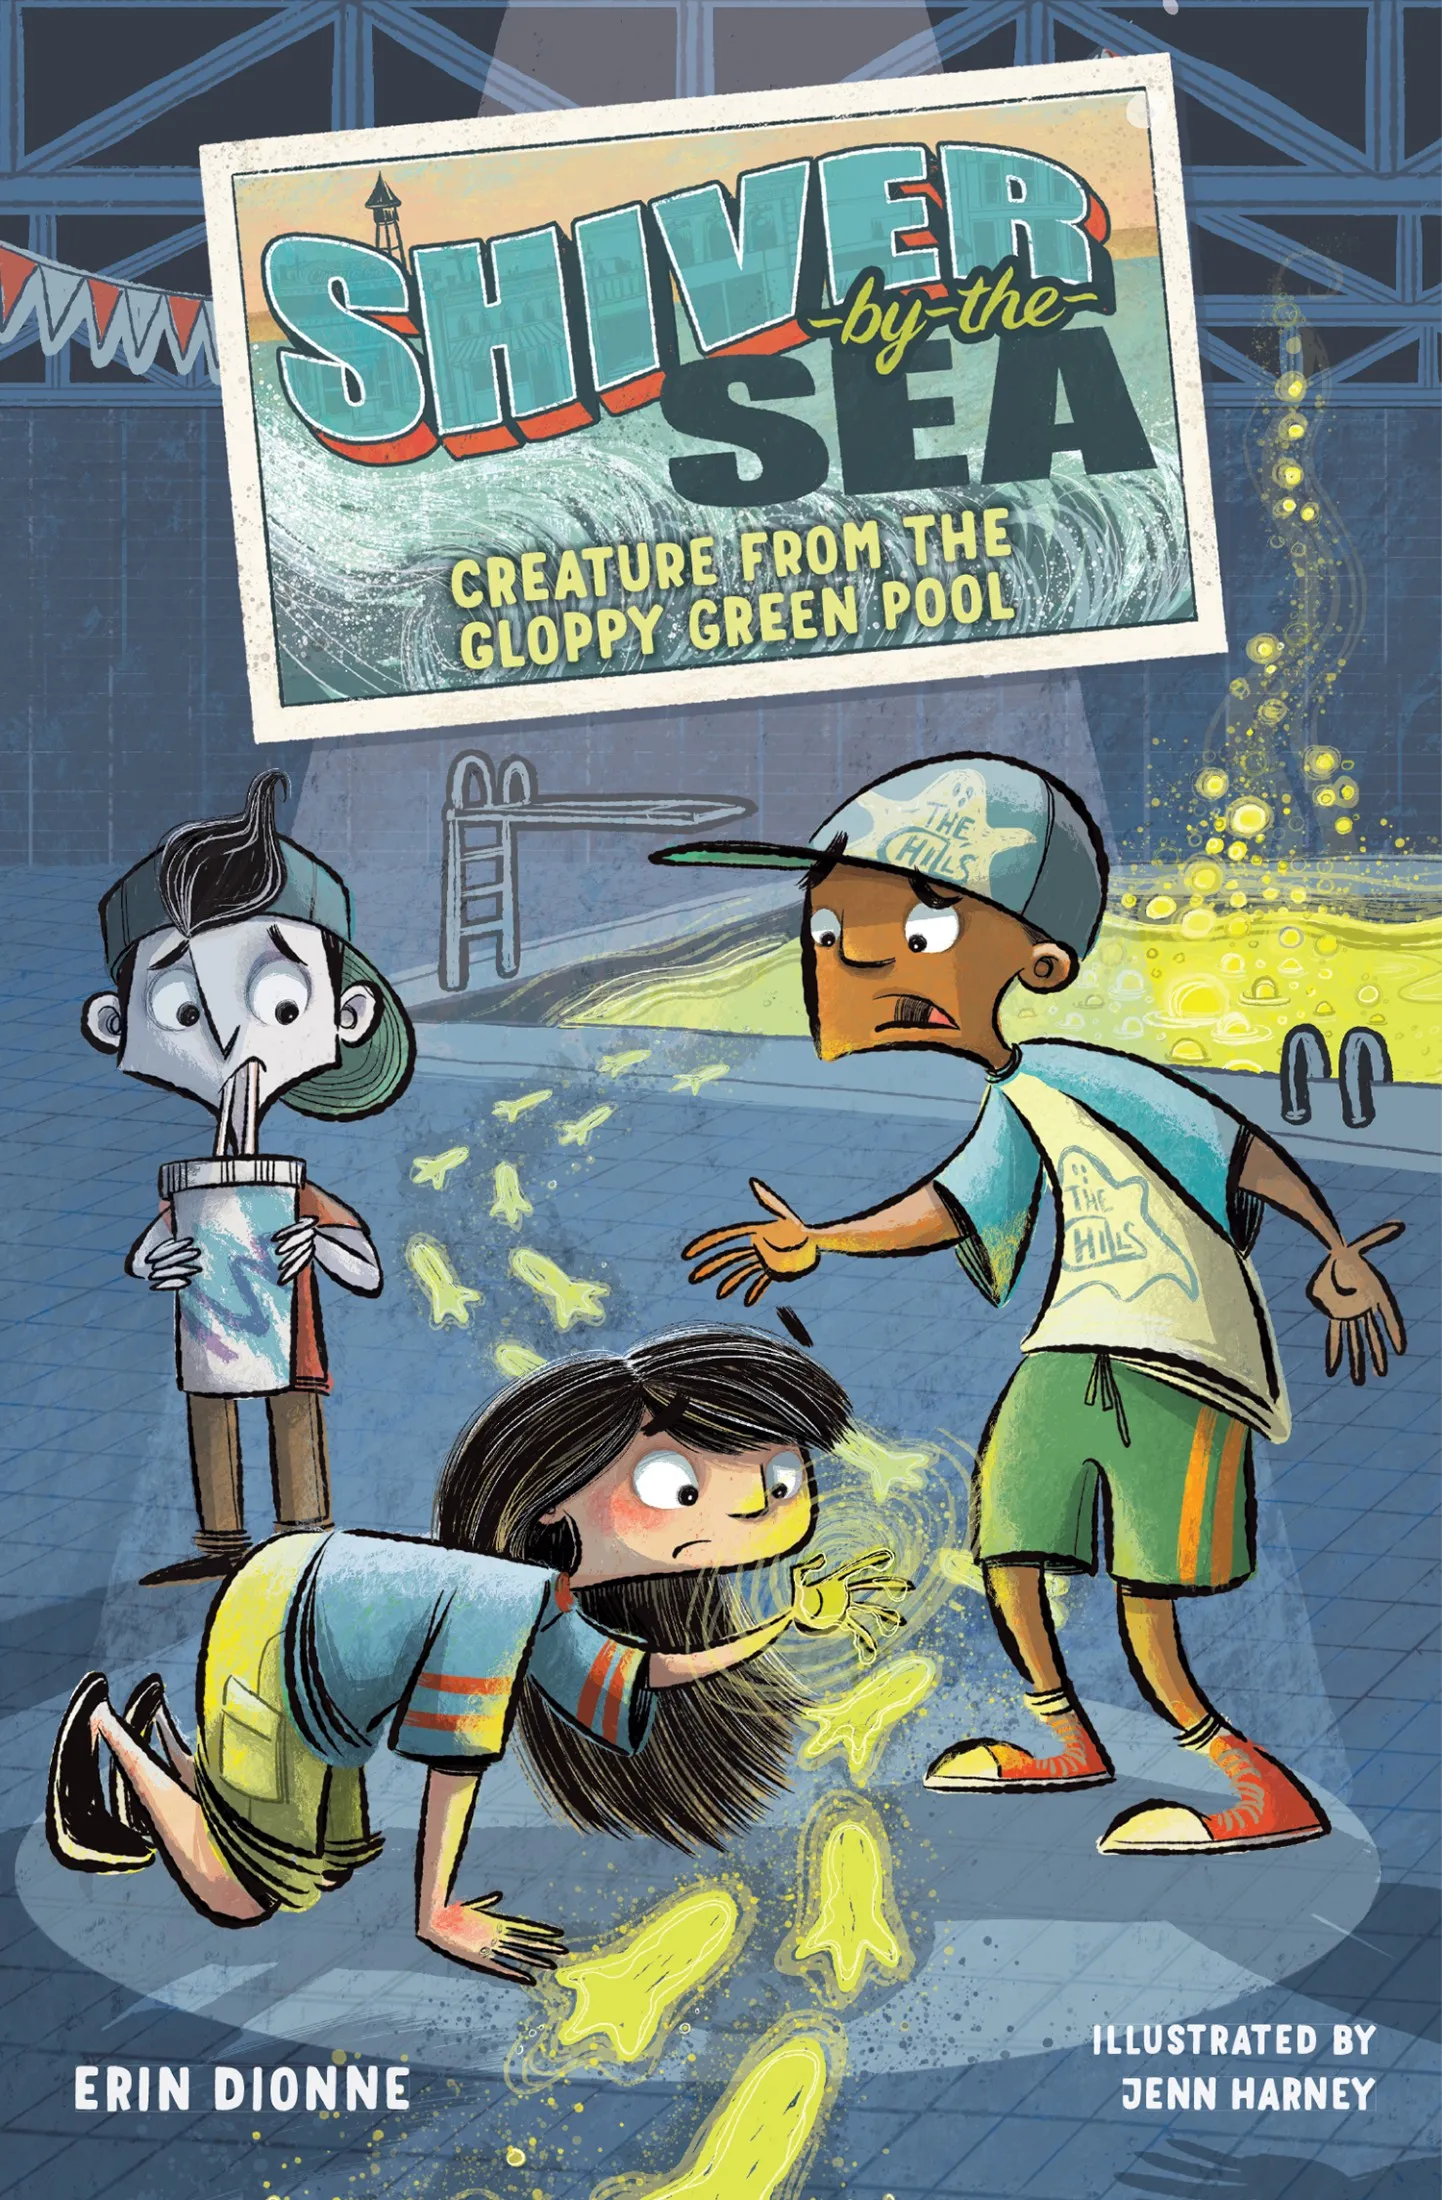 Creature from the Gloppy Green Pool (Shiver by the Sea #3)